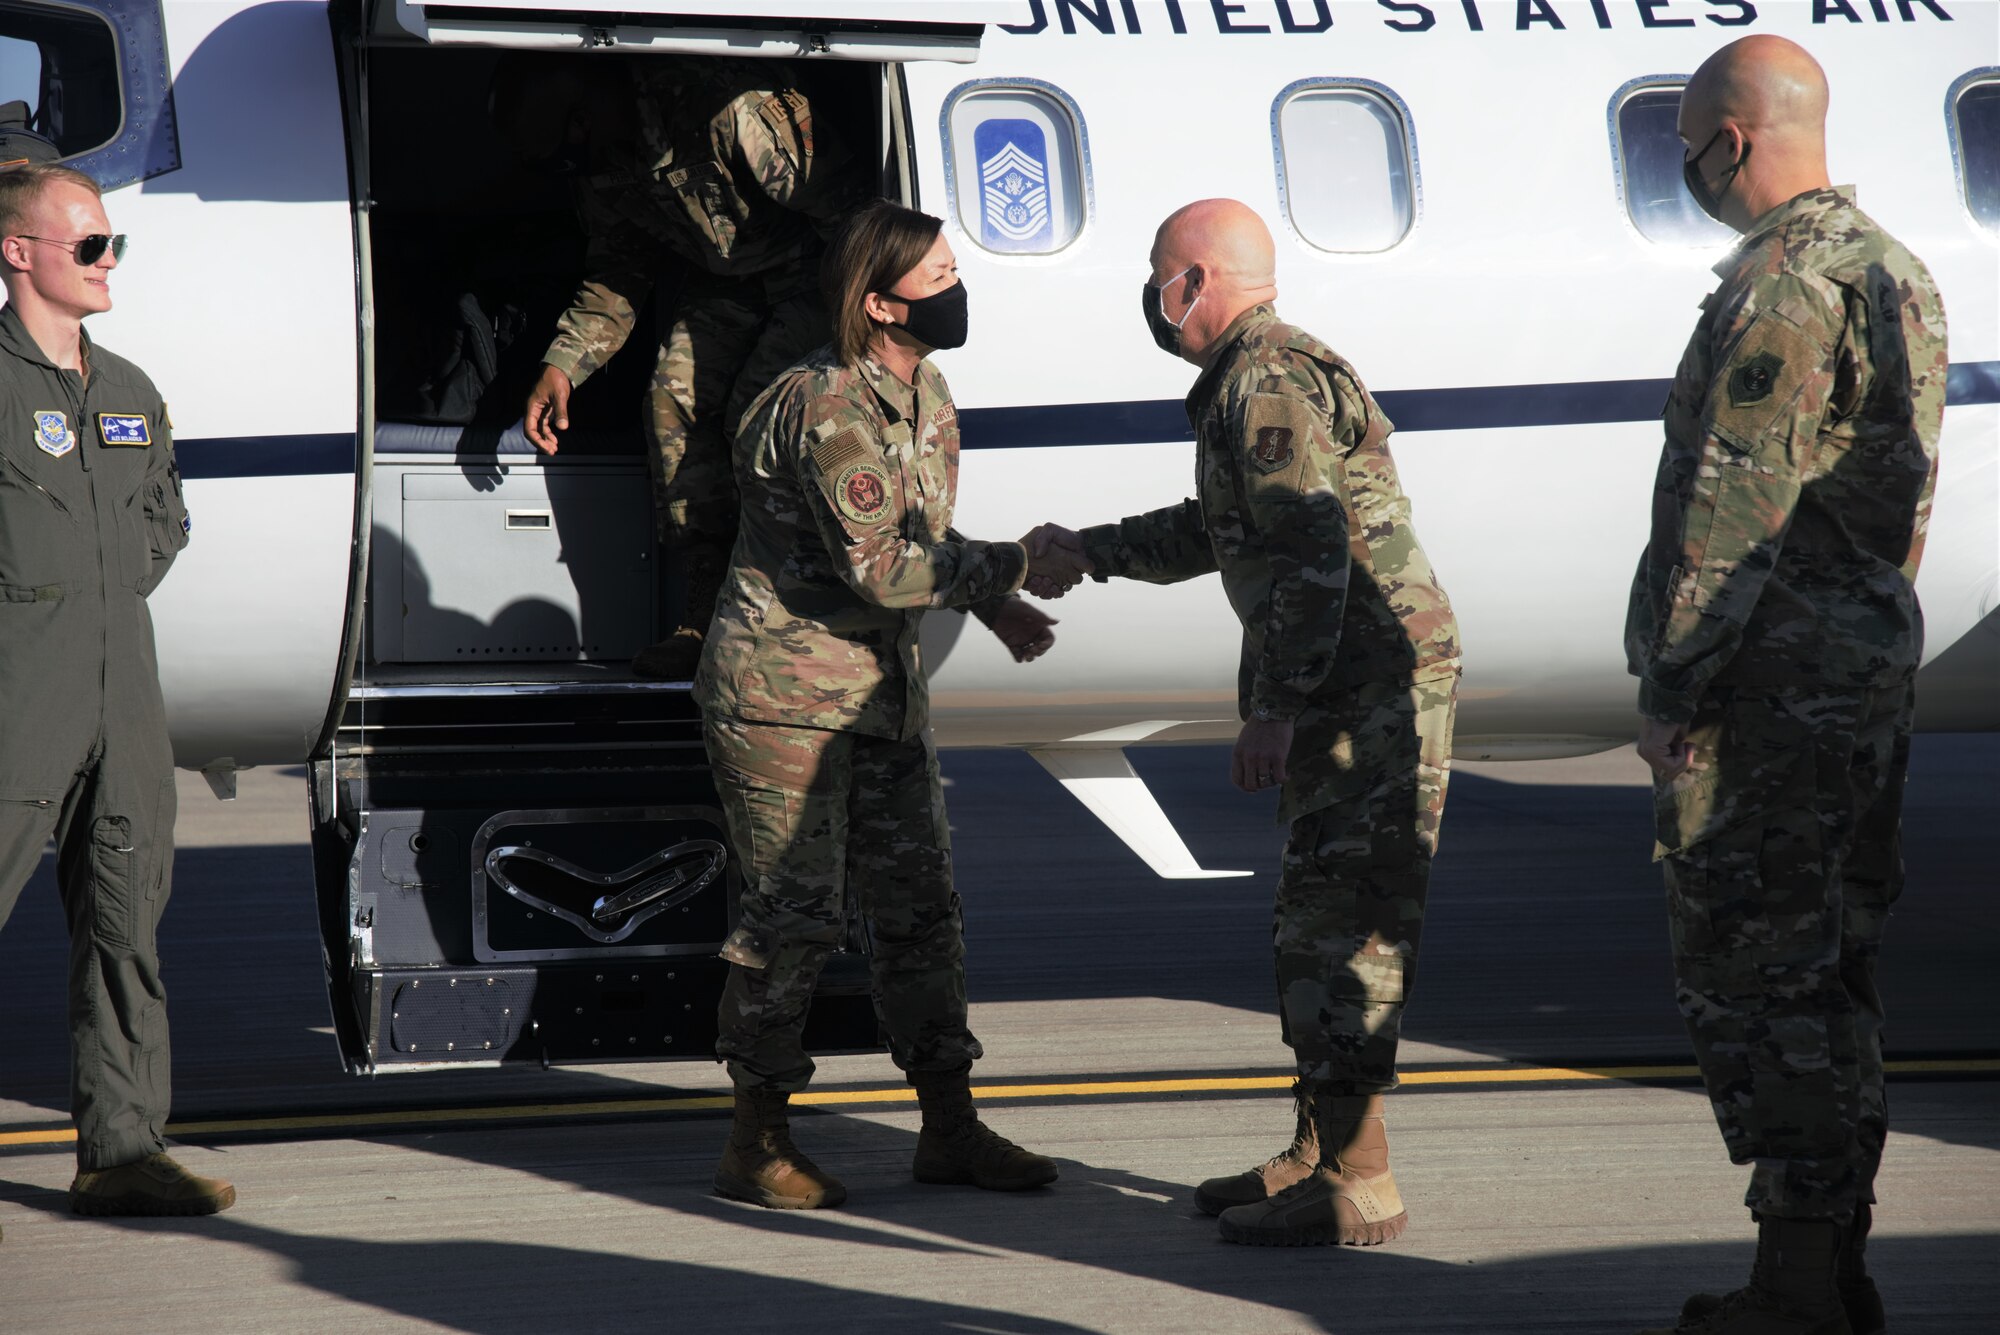 Brig. Gen. Daniel Gabrielli, Task Force-Holloman commander, greets Chief Master Sgt. of the Air Force JoAnne S. Bass as she arrives to tour and meet Airmen and Guardians from the 49th Wing and Task Force-Holloman on Holloman Air Force Base, New Mexico, Oct. 13, 2021. The Department of Defense, through U.S. Northern Command, and in support of the Department of State and Department of Homeland Security, is providing transportation, temporary housing, medical screening, and general support for at least 50,000 Afghan evacuees at suitable facilities, in permanent or temporary structures, as quickly as possible. This initiative provides Afghan evacuees essential support at secure locations outside Afghanistan. (U.S. Navy photo by Mass Communications Specialist 1st Class Sarah Rolin)